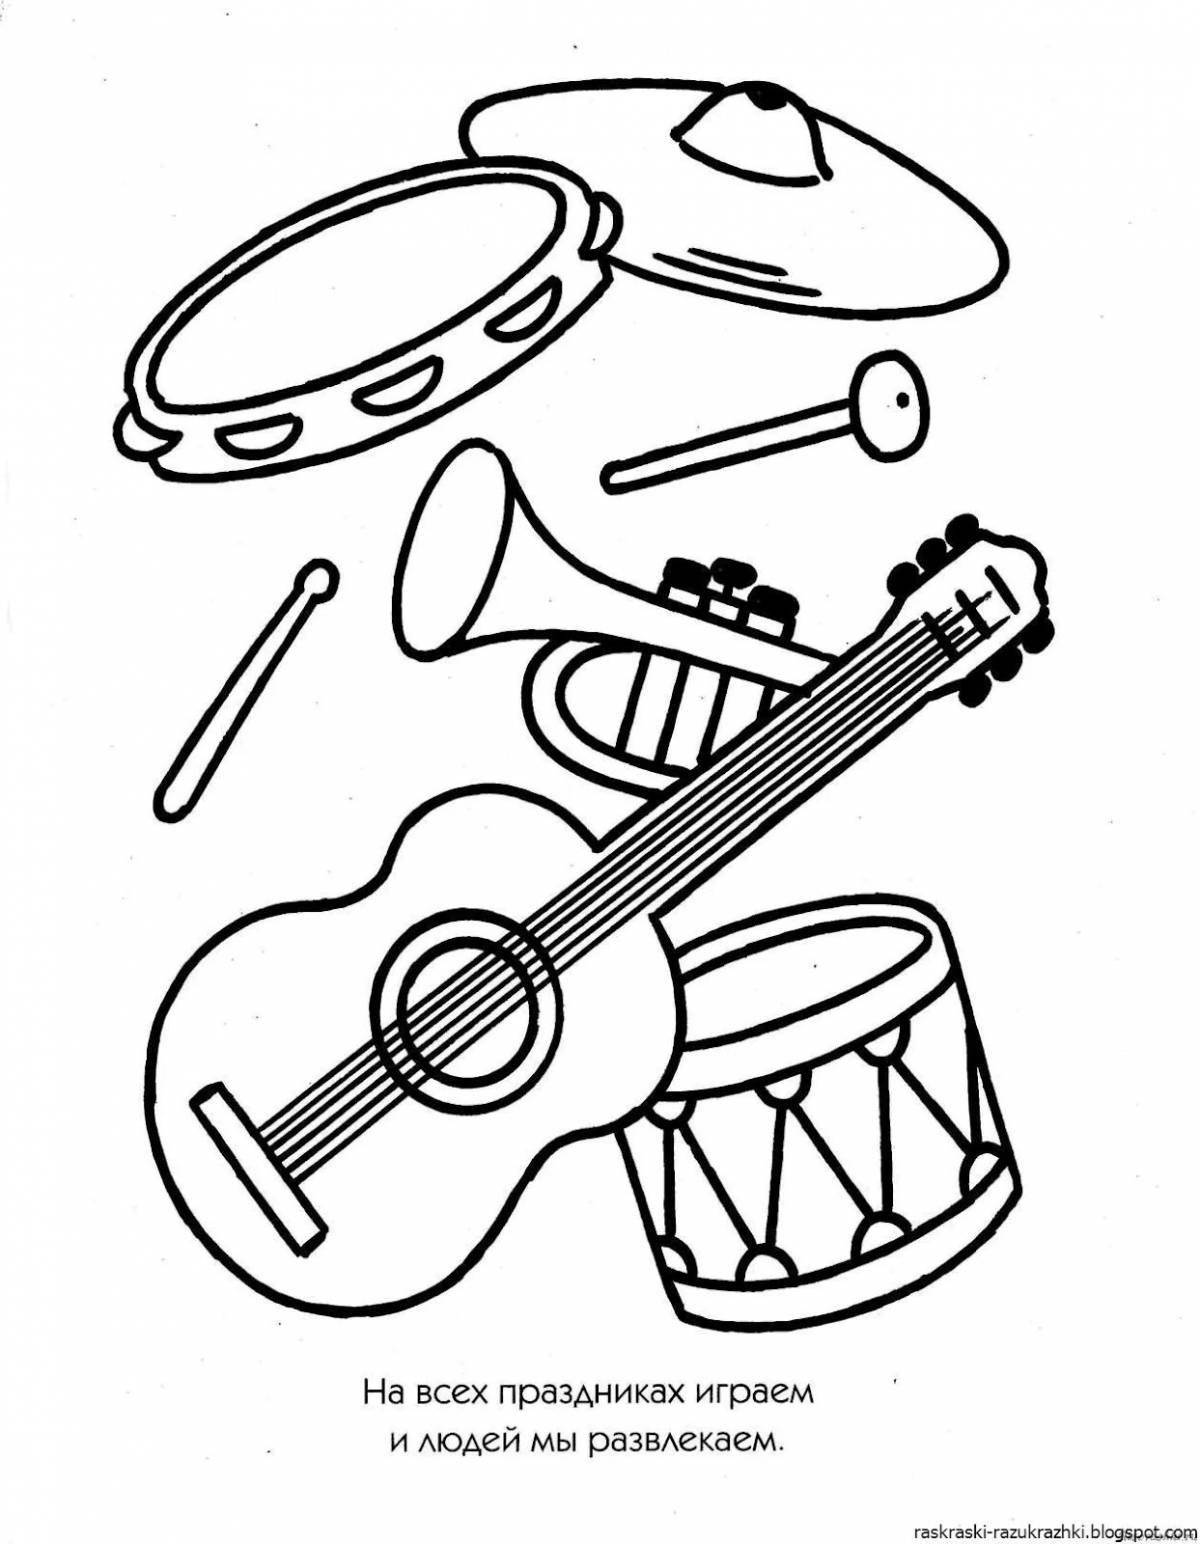 Colorful musical instruments coloring book for 6-7 year olds